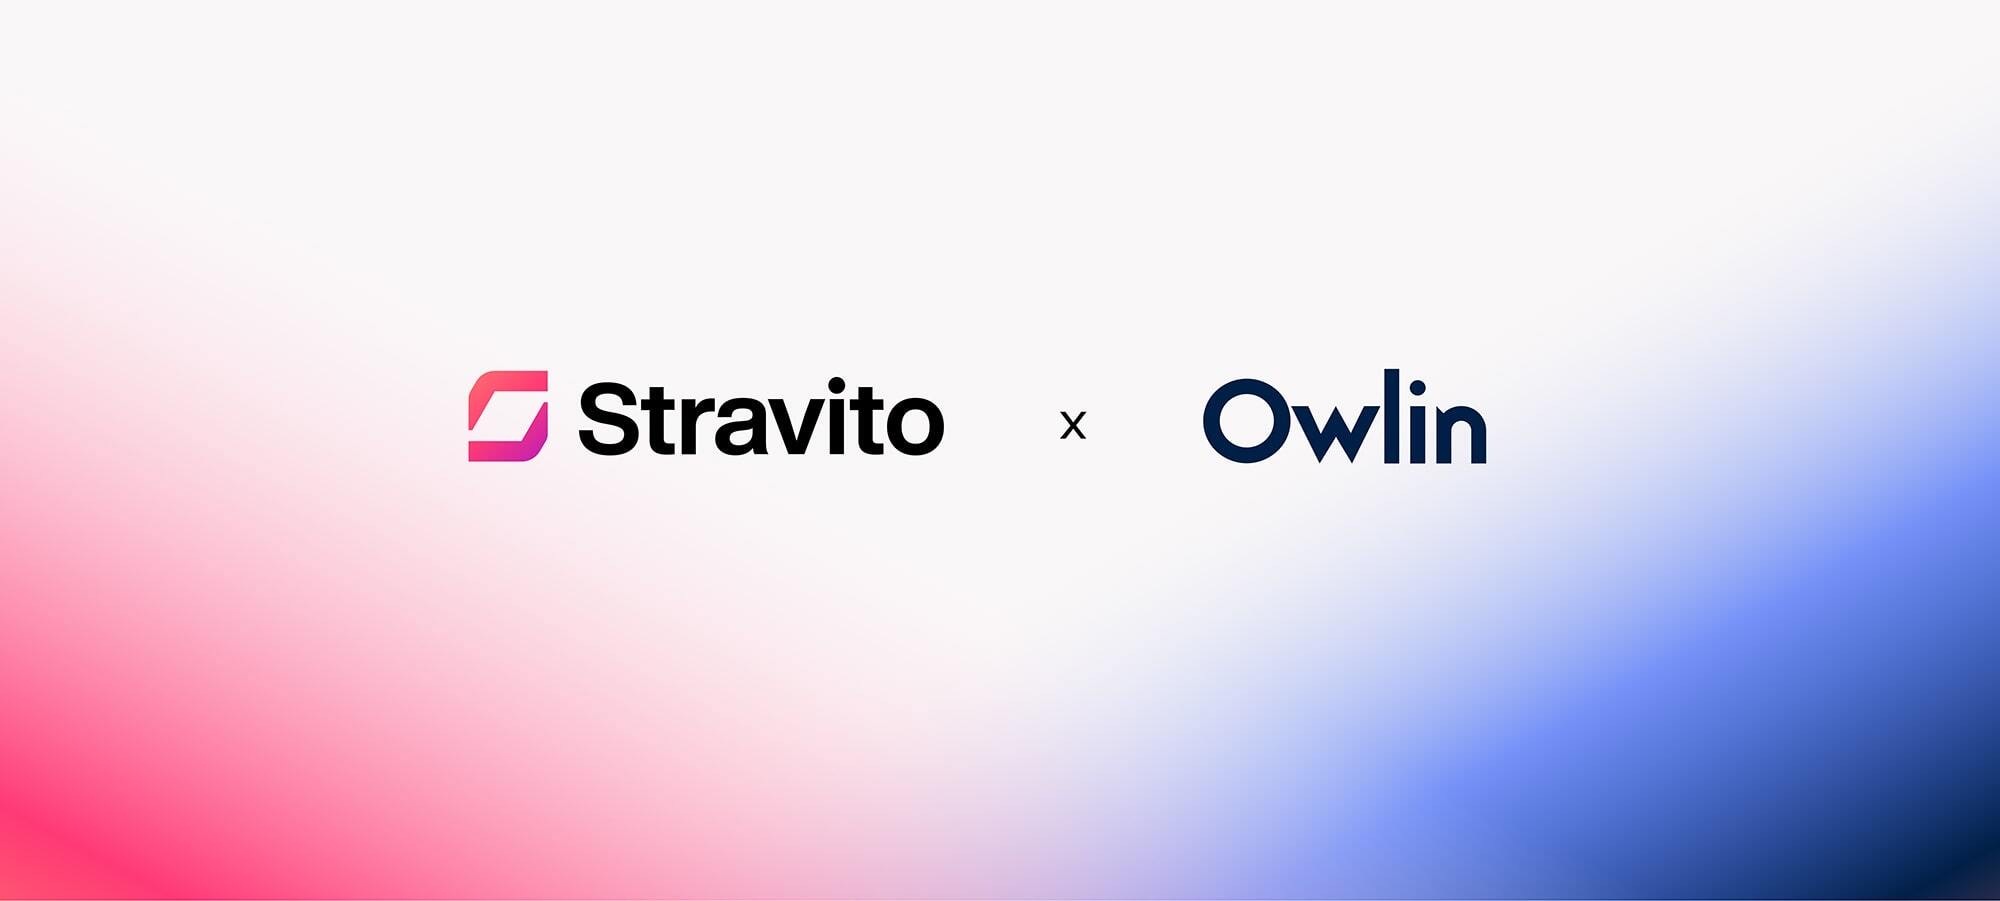 Stravito and Conjointly announce their partnership to help customers maximize the value of their insights